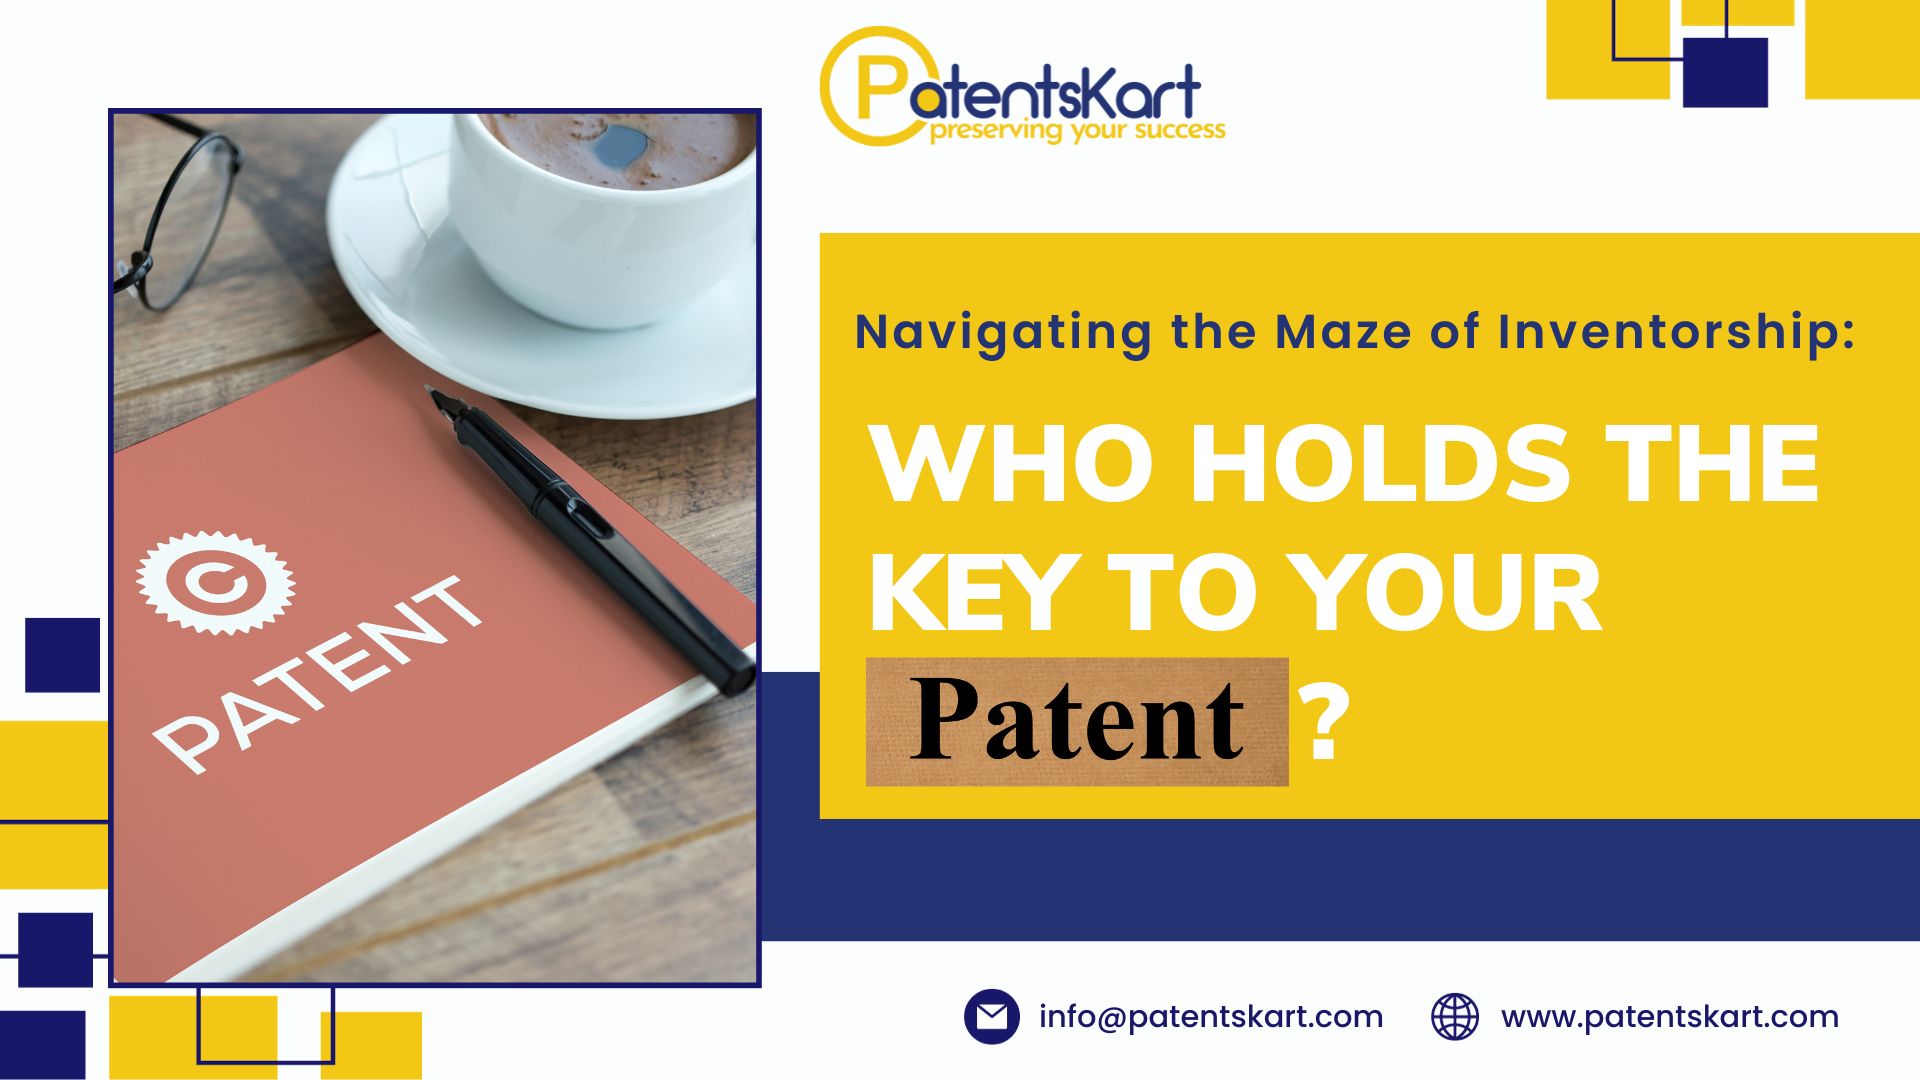 patent research services patent support services ip support services patent prosecution support technology landscape analysis punishment for patent infringement